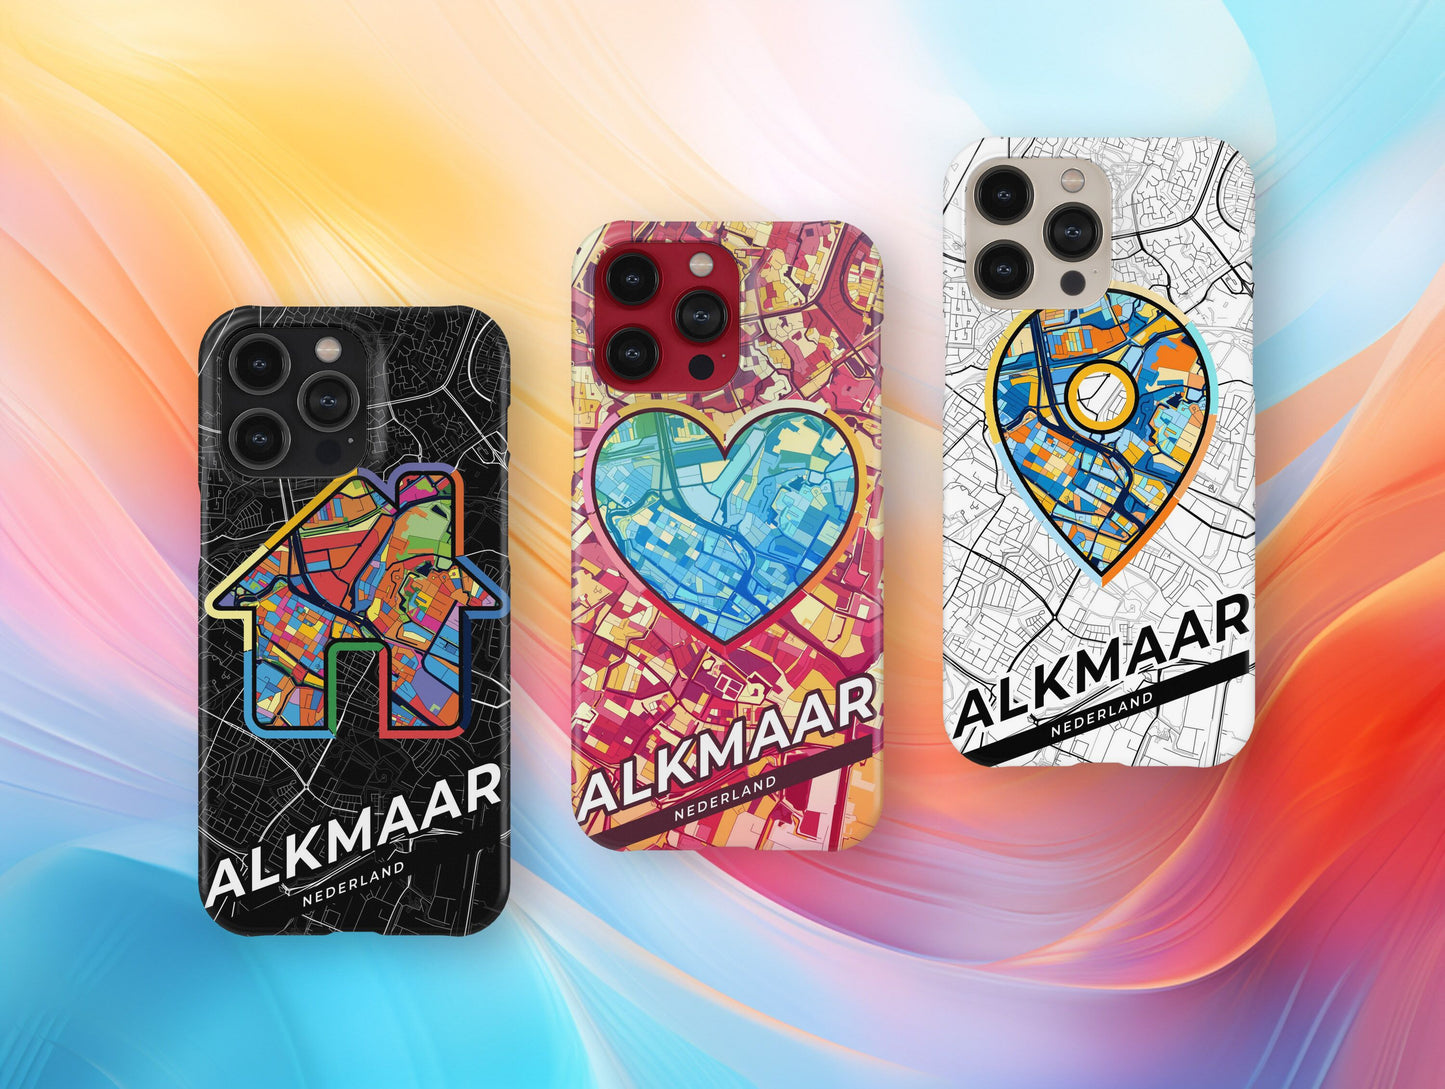 Alkmaar Netherlands slim phone case with colorful icon. Birthday, wedding or housewarming gift. Couple match cases.